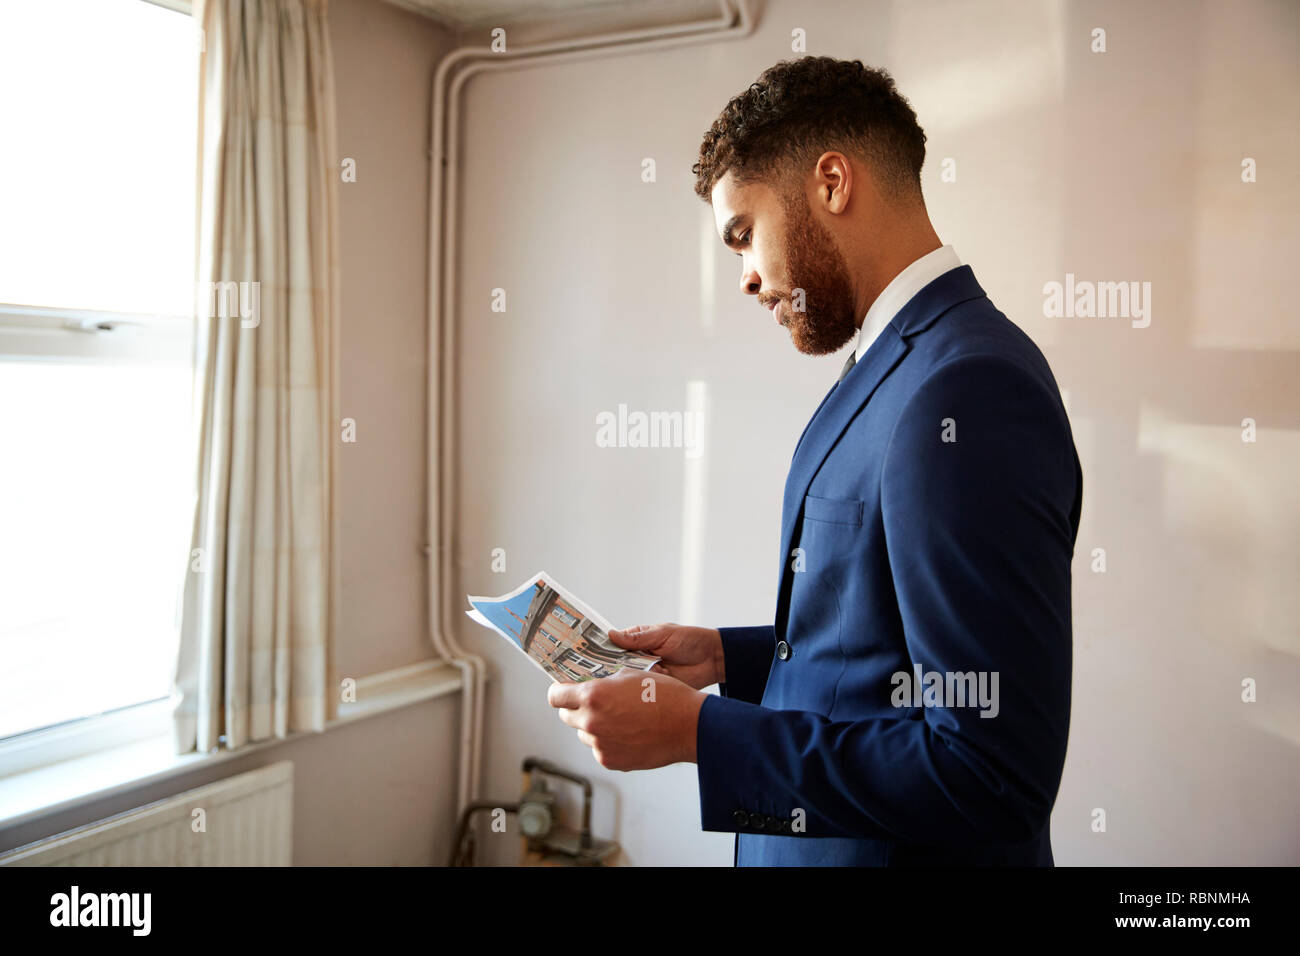 Male Realtor Looking At House Details In Property For Renovation Stock Photo